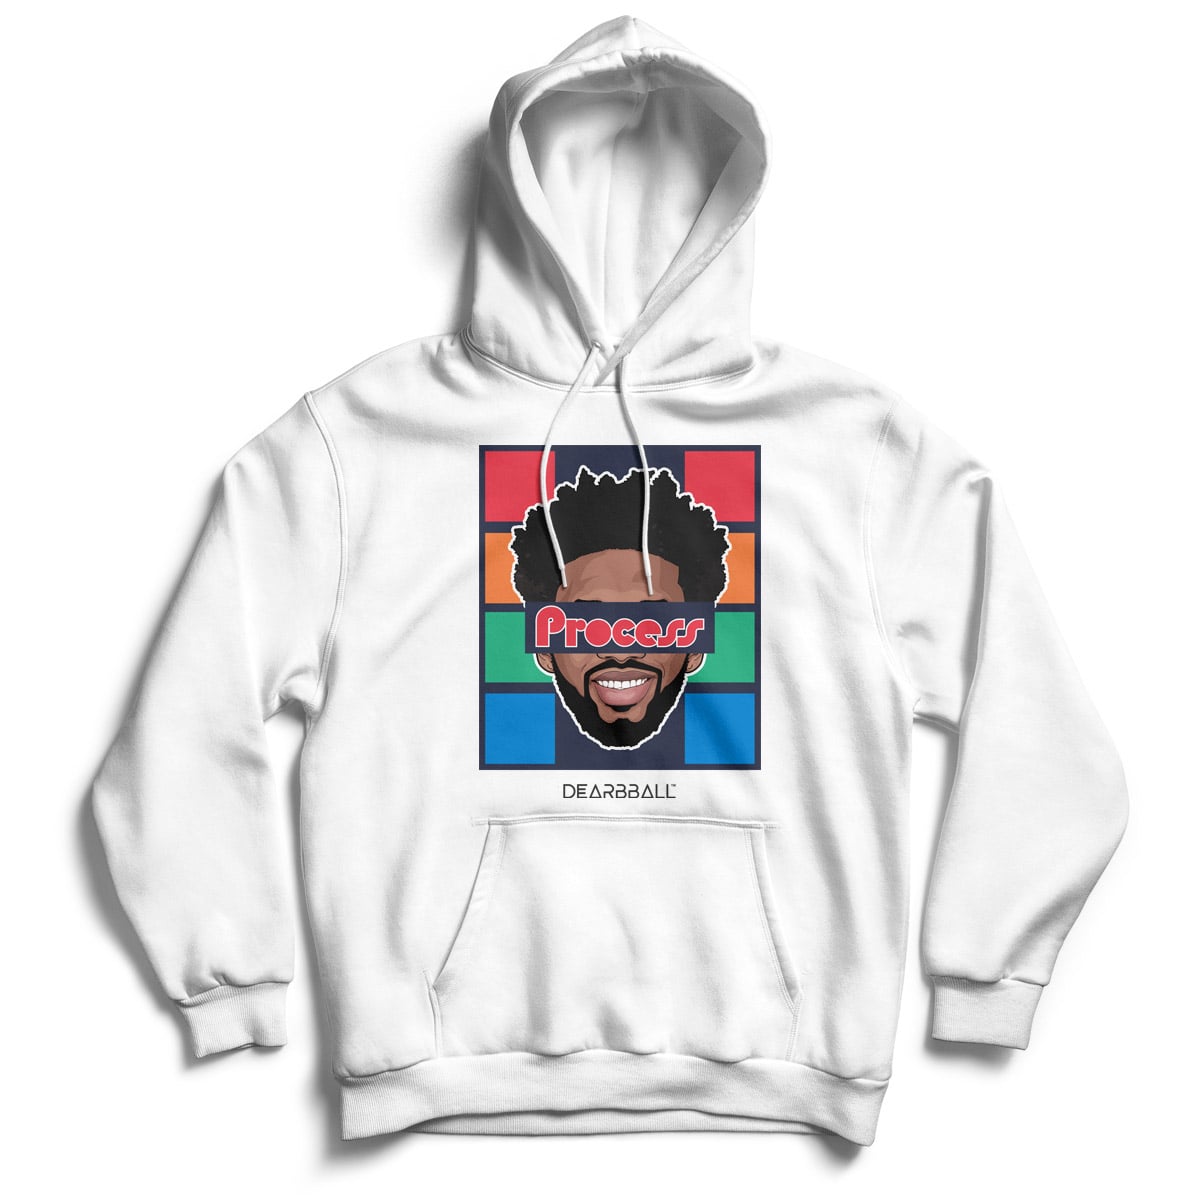 Hoodie-Joel-Embiid-Philadelphia-Sixers-Dearbball-clothes-brand-france